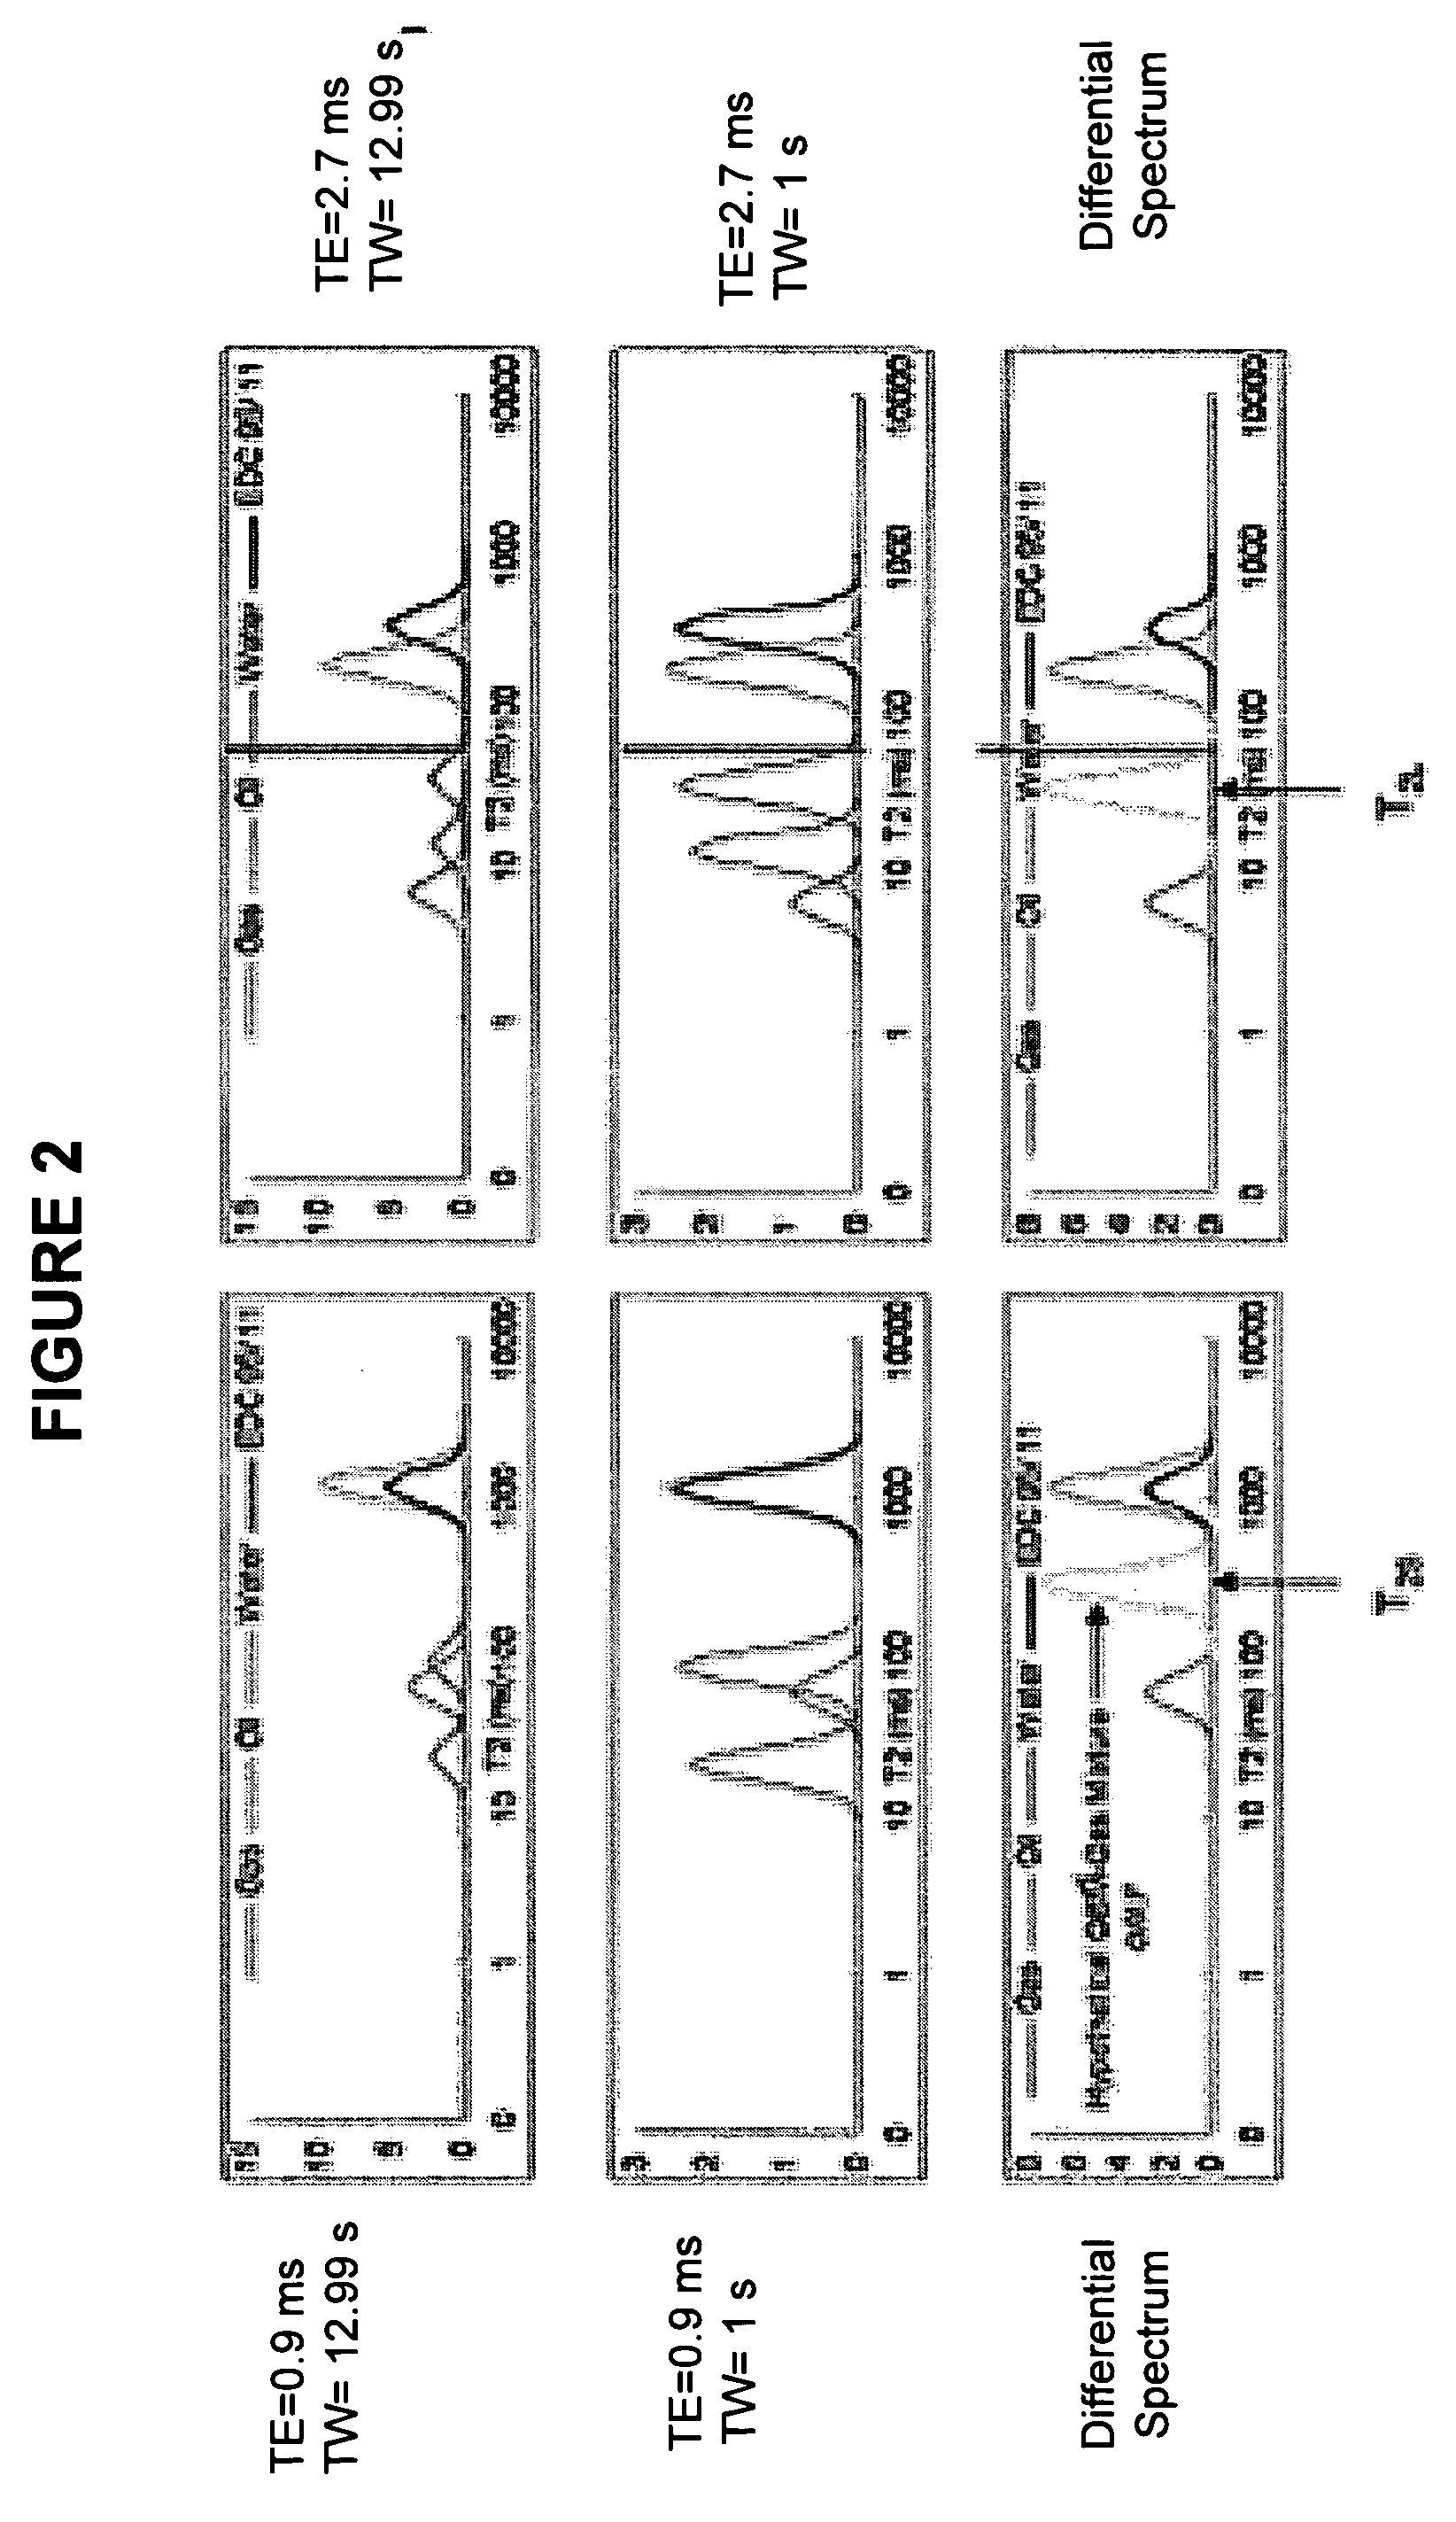 Method and apparatus for detecting hydrocarbons with NMR logs in wells drilled with oil-based muds